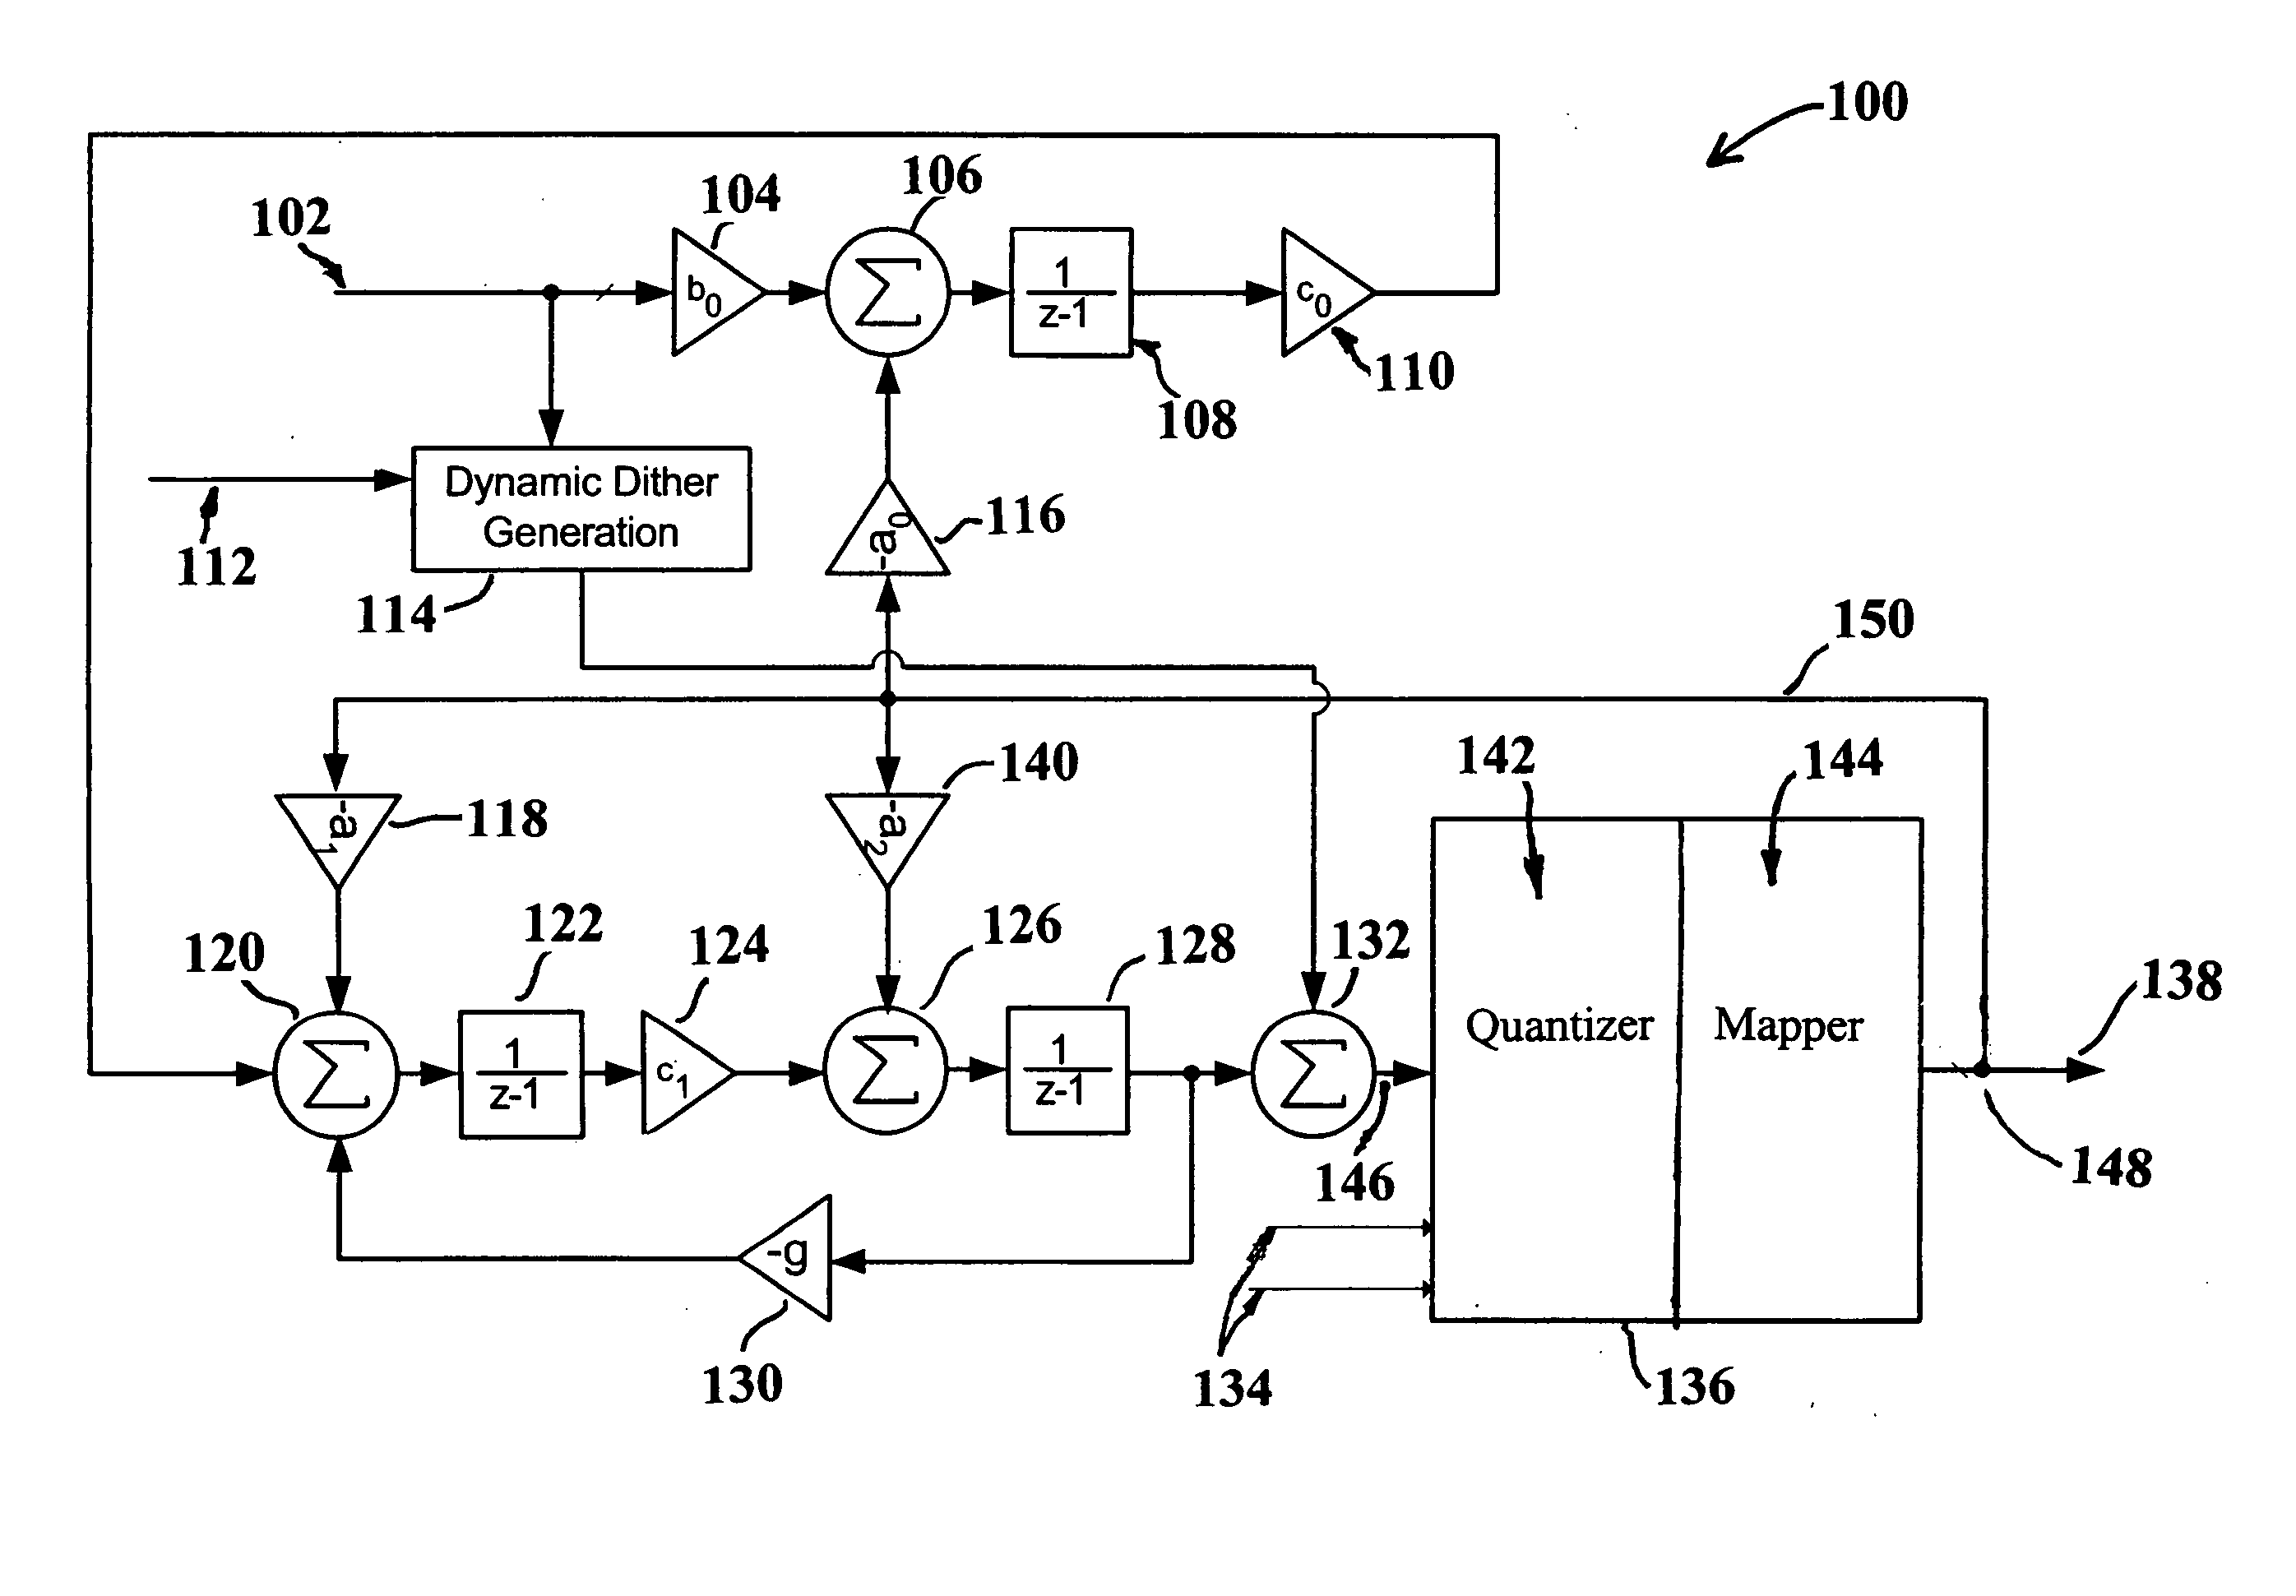 Modulation circuit including a feedback loop with an embedded mapper